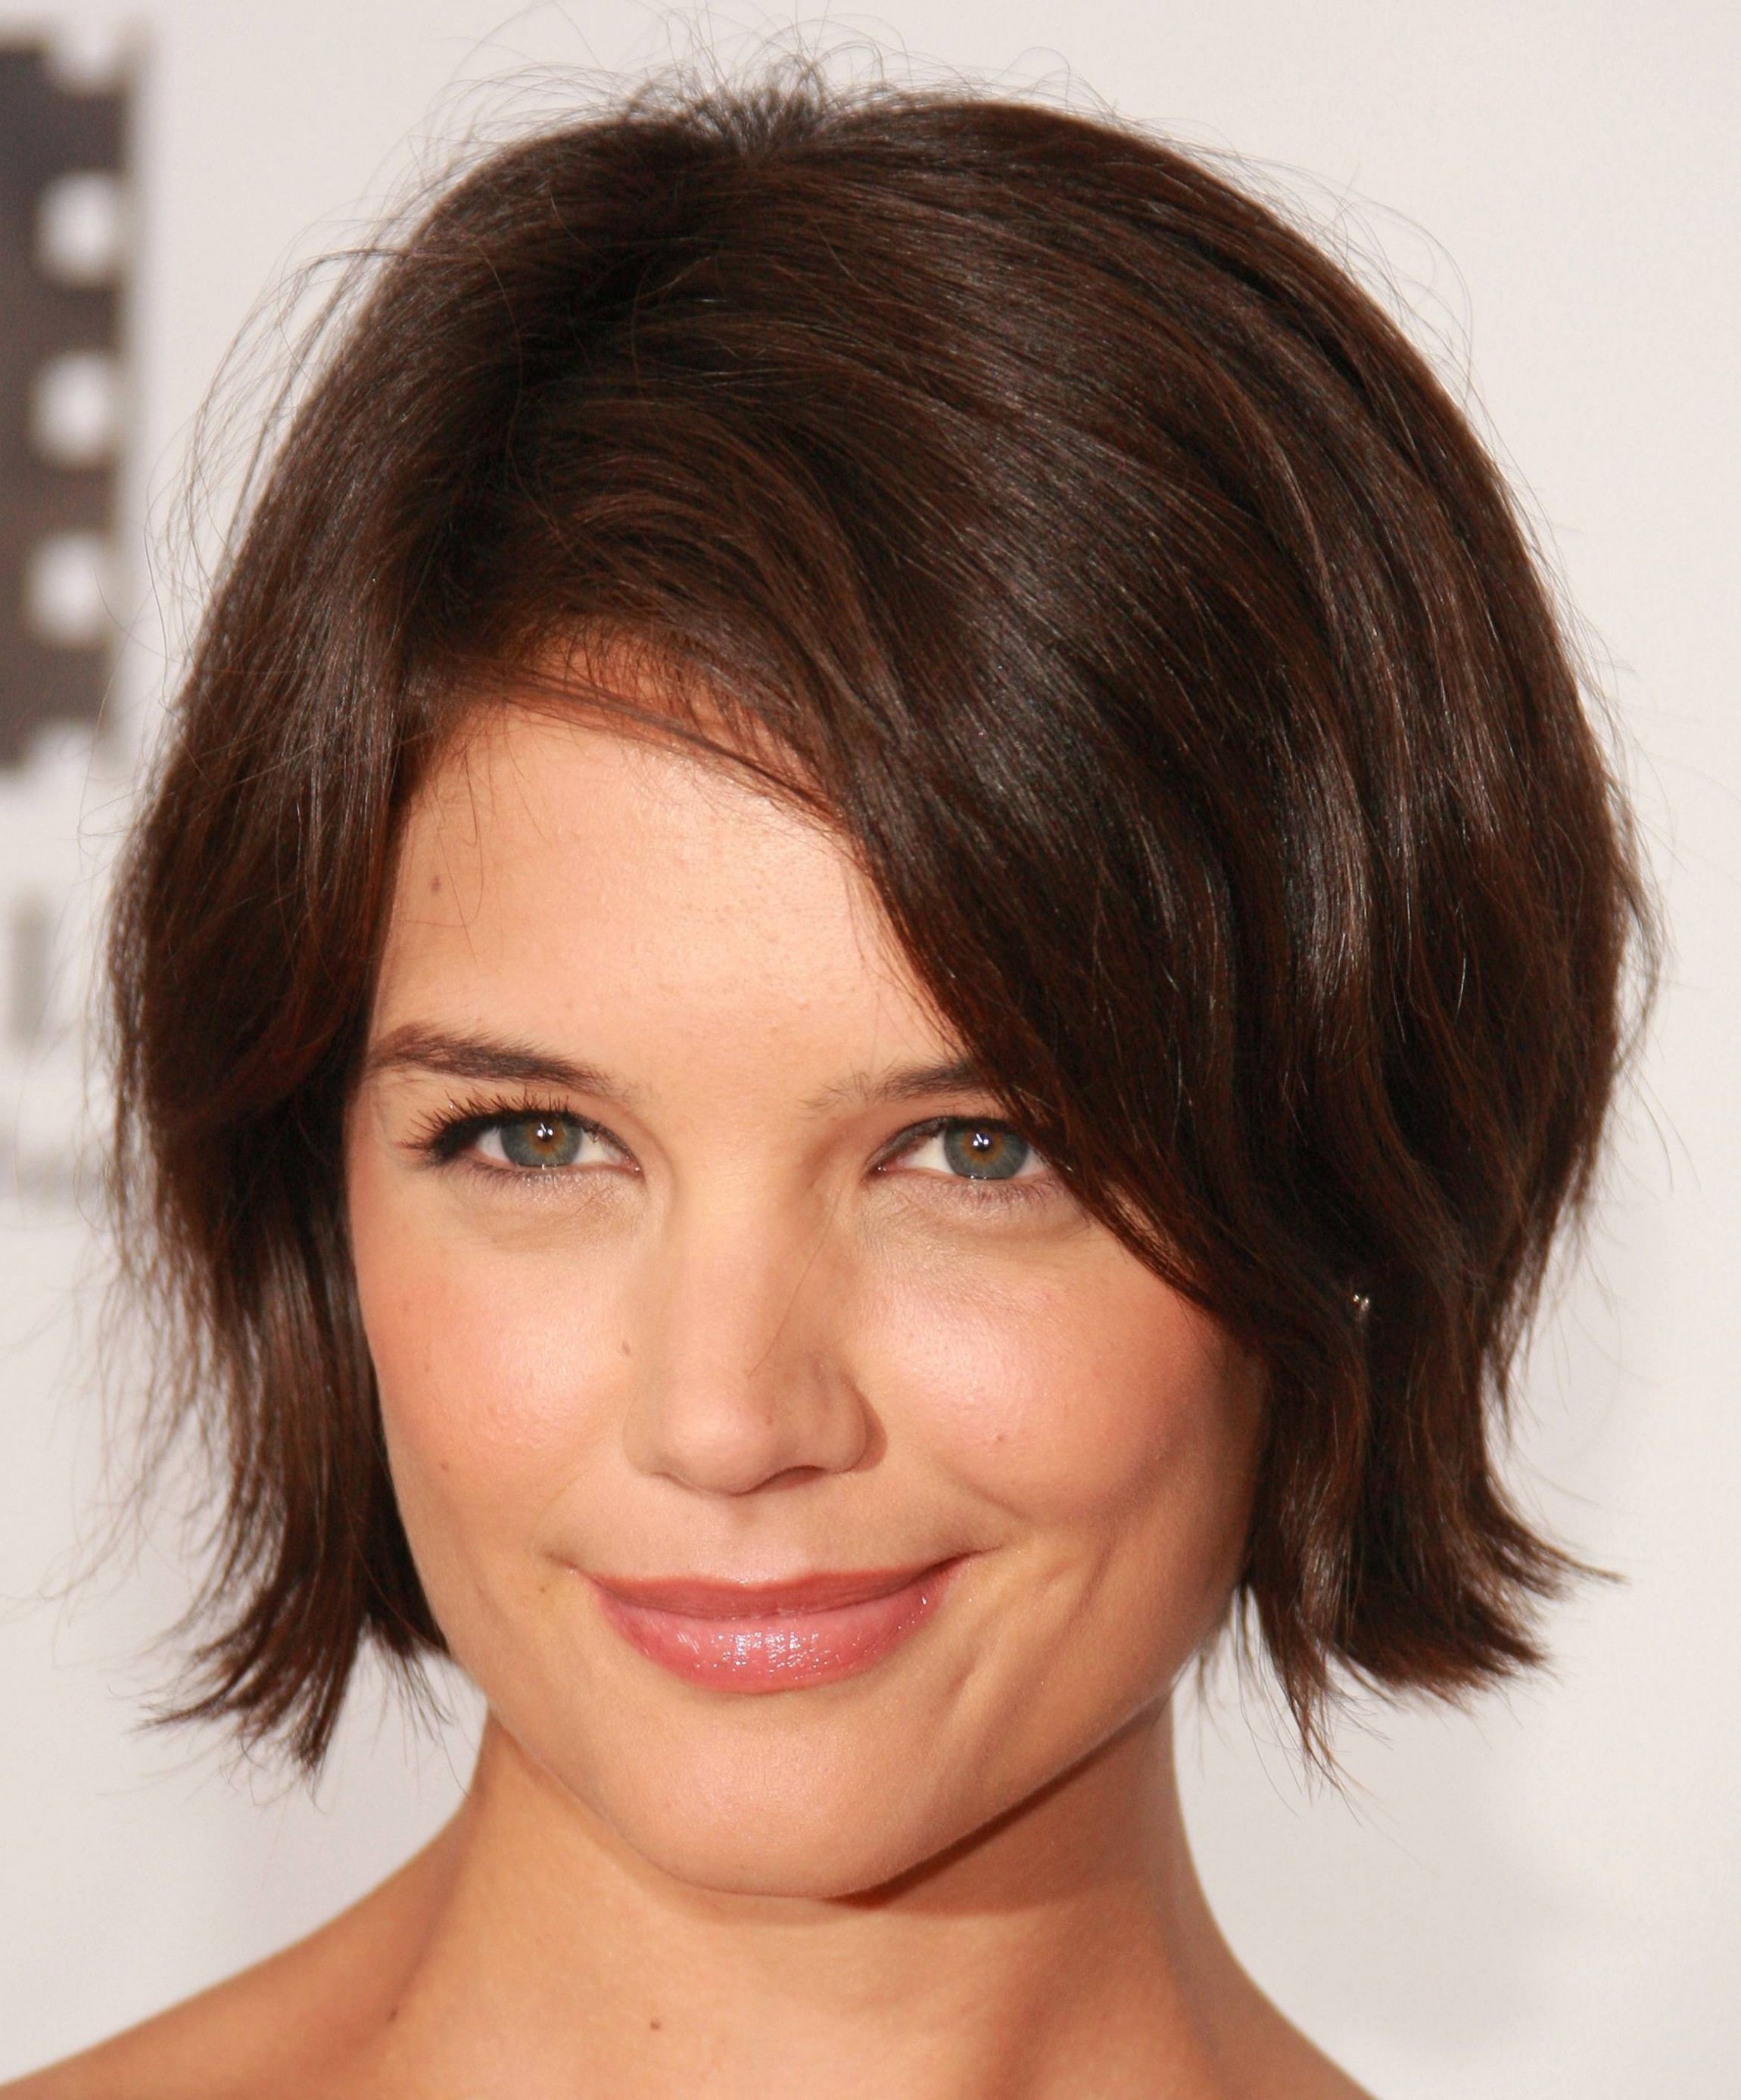 Best Short Hairstyles – Cute Hair Cut Guide For Round Face Shape Inside Short Hairstyles For Full Round Faces (View 12 of 25)